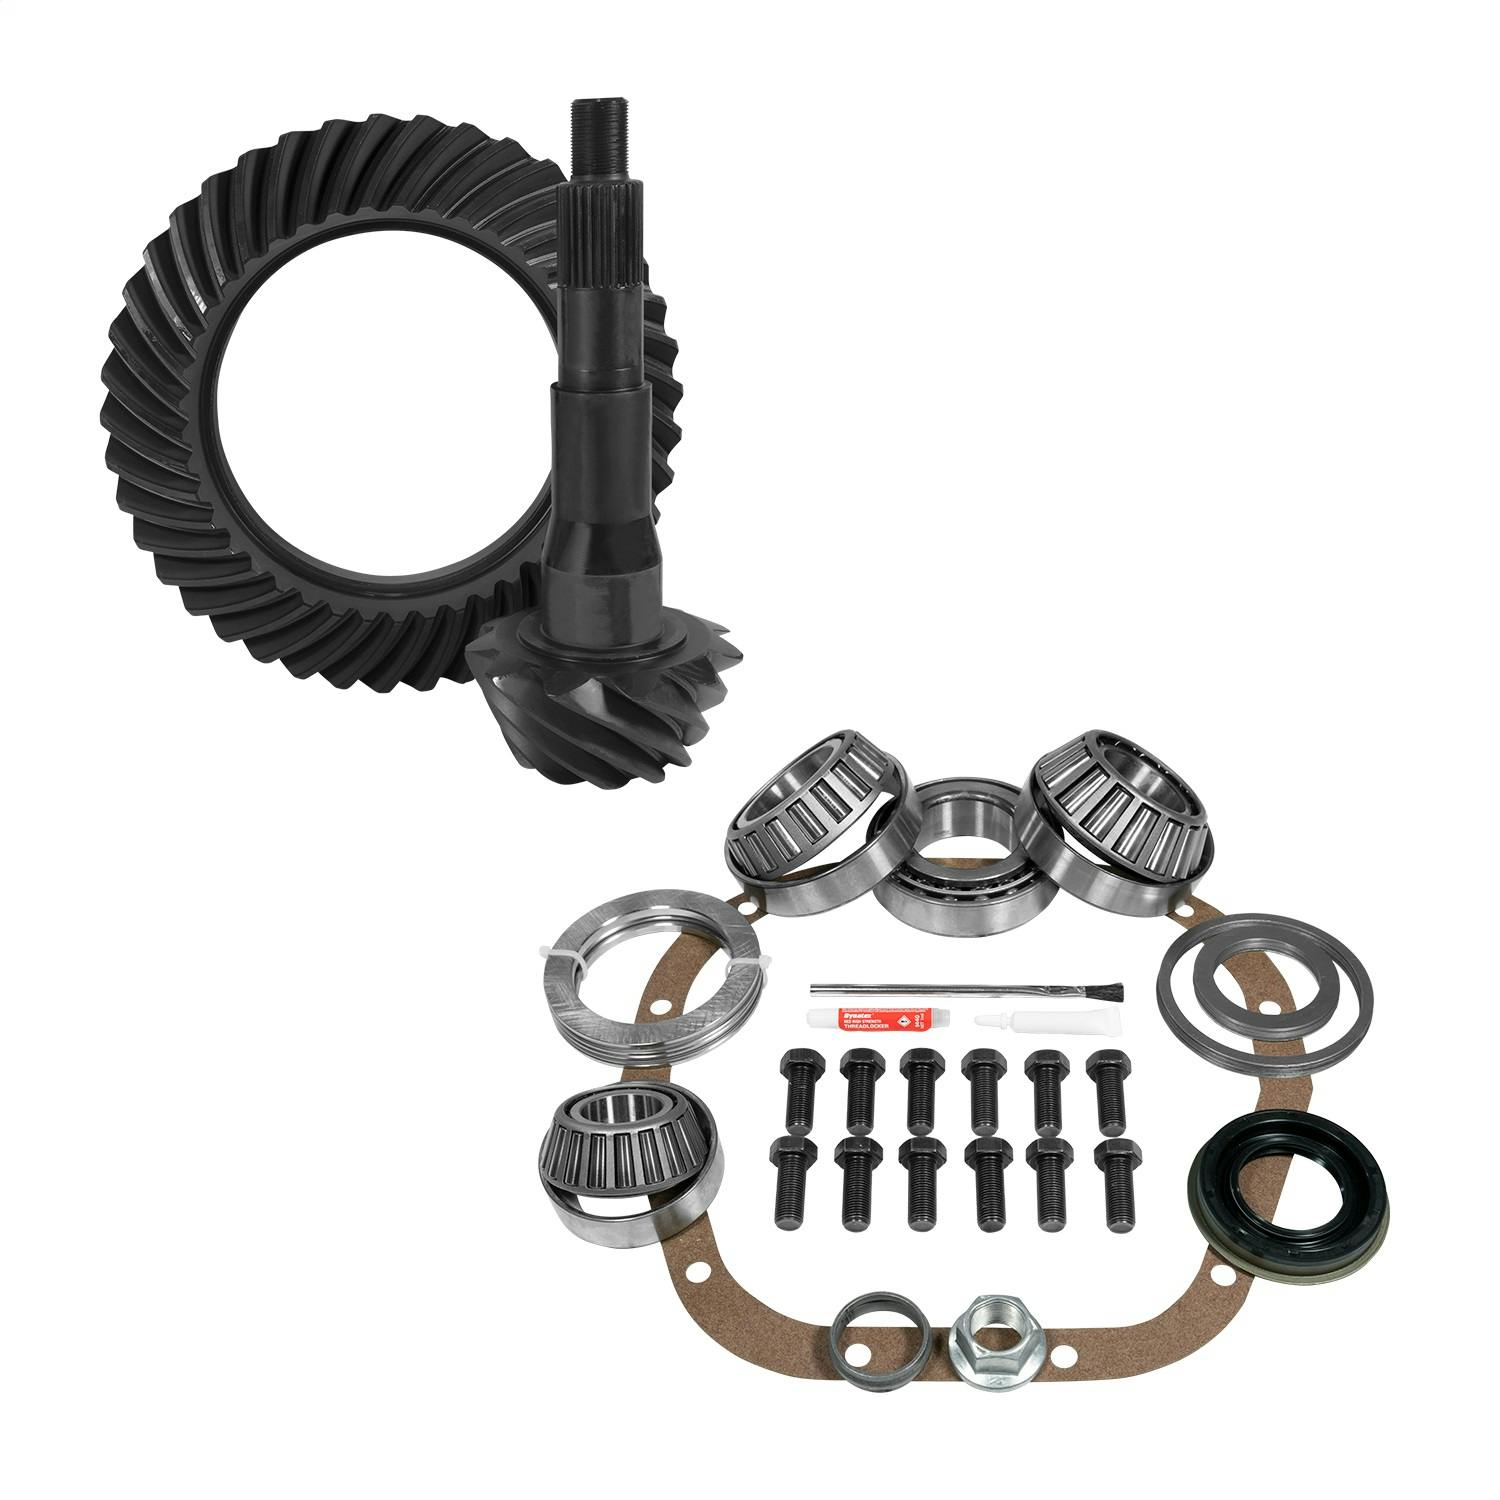 USA Standard Gear ZGK2138 10.5in. Ford 4.56 Rear Ring/Pinion and Install Kit